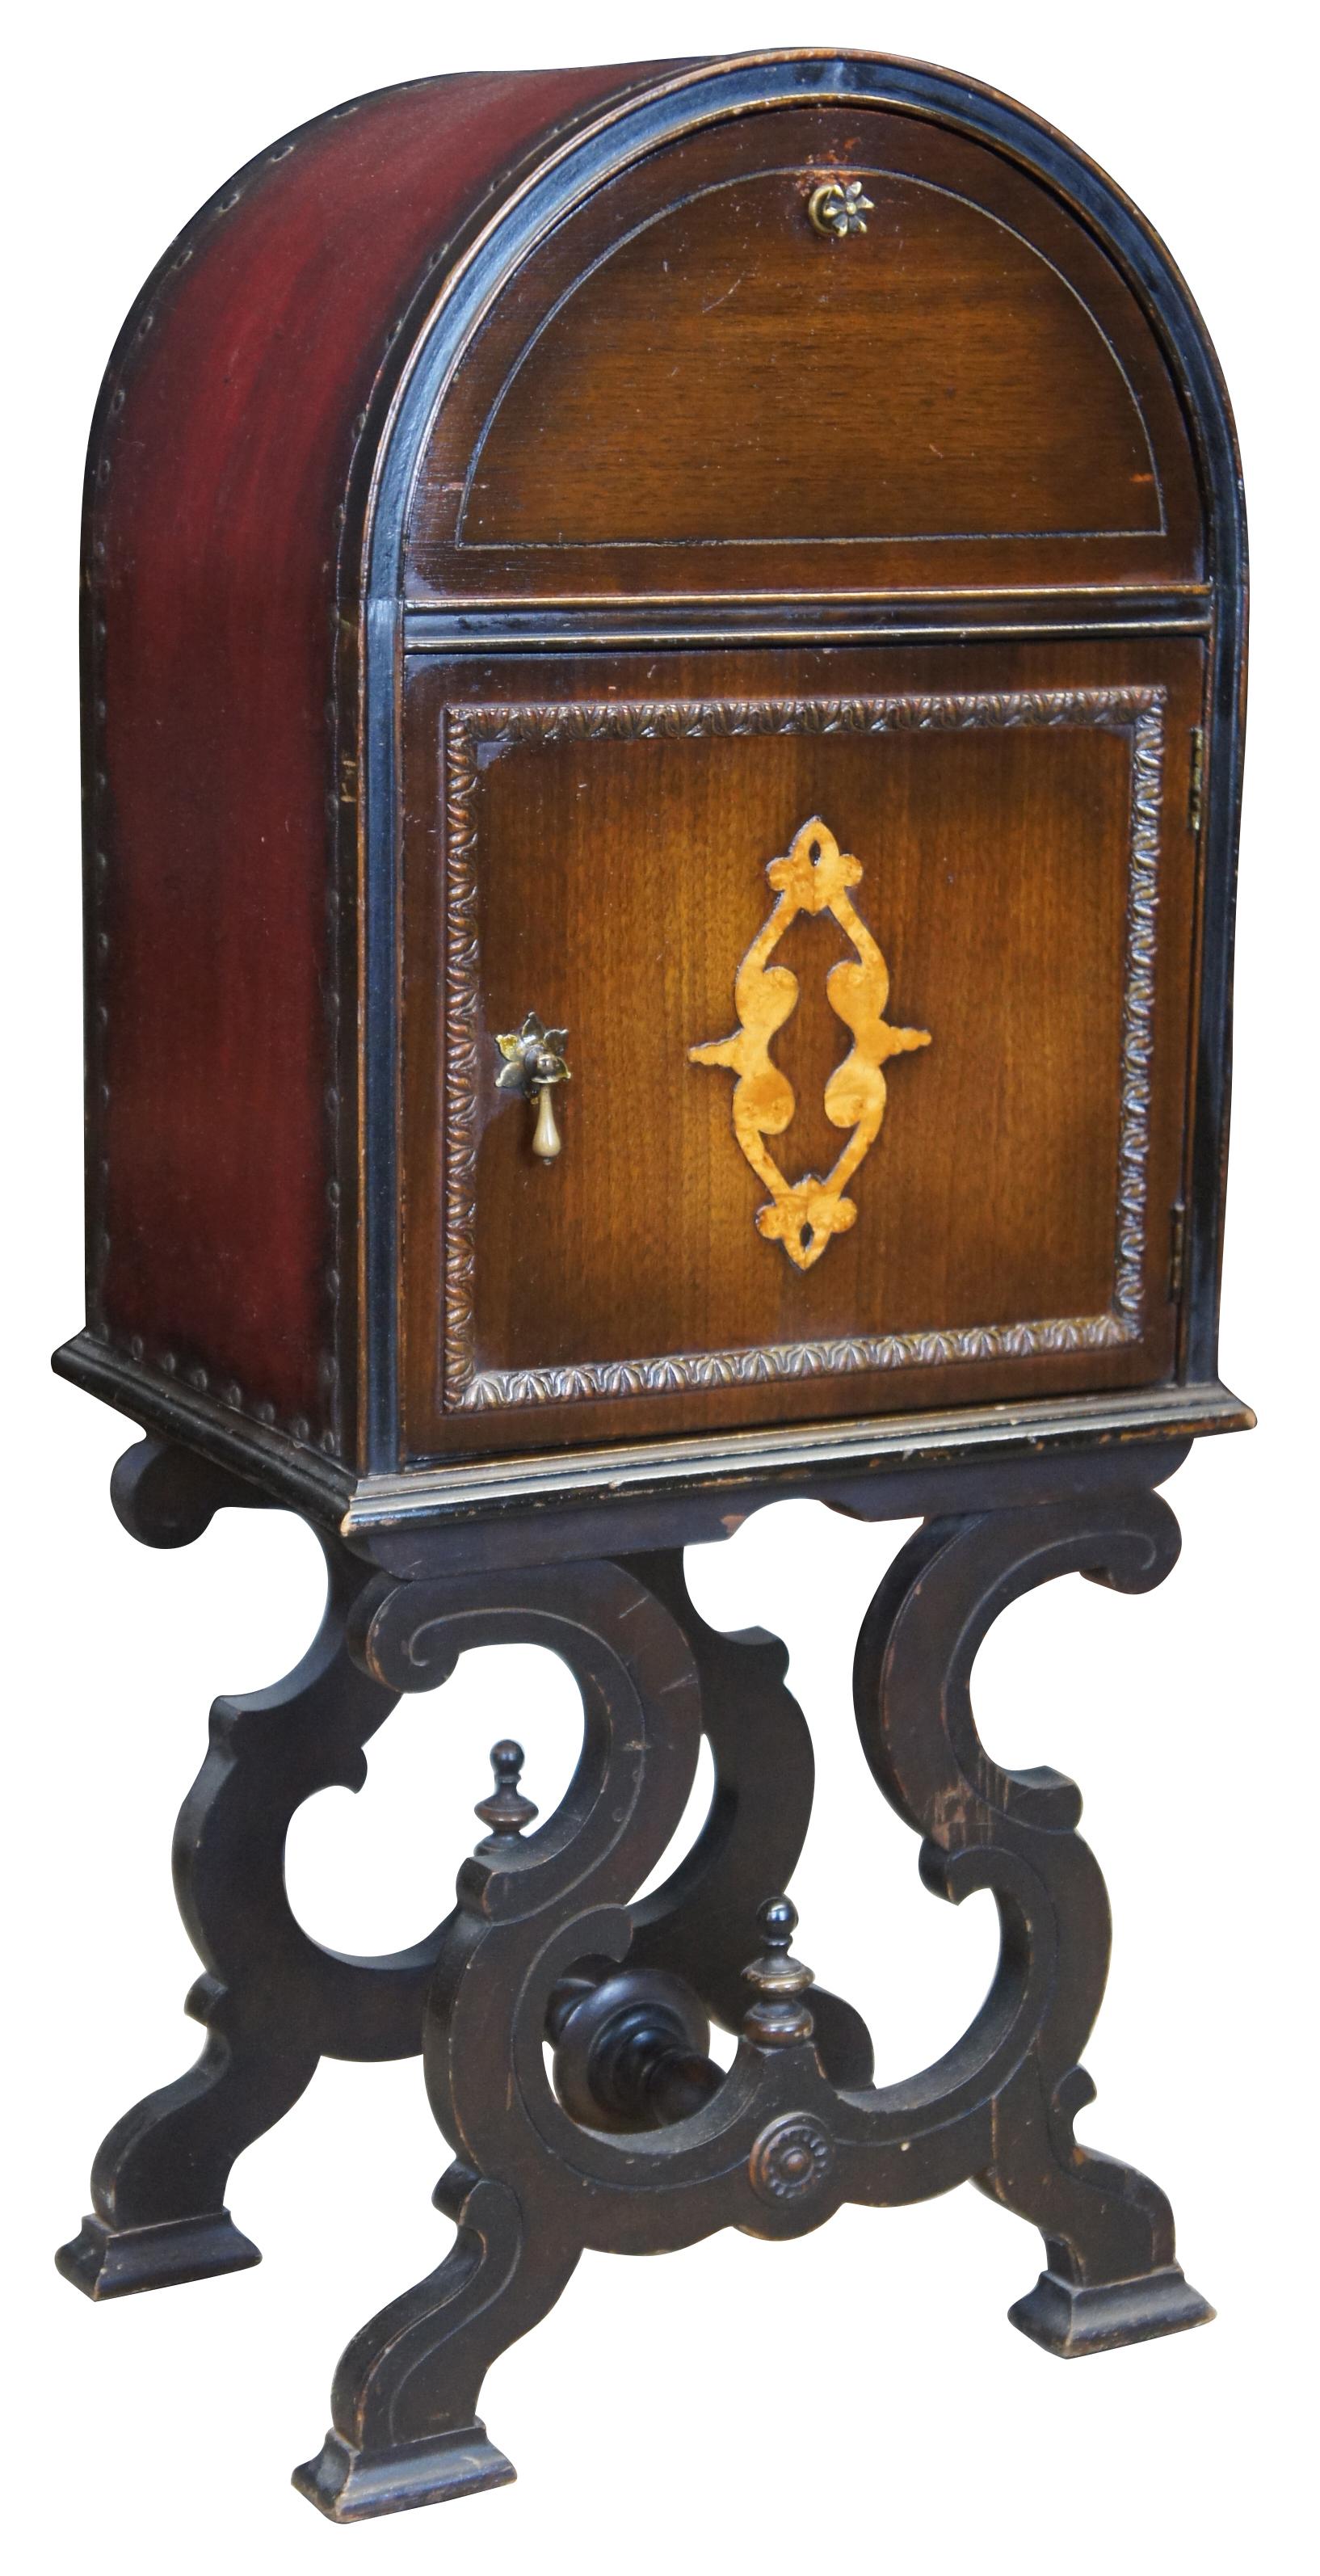 Early 20th century Spanish or Jacobean revival smoking cabinet. Features a domed cabinet with tin lined humidor and upper compartment for storage, over an ornate trestle style spooled base. Made from walnut with a leather exterior featuring nailhead